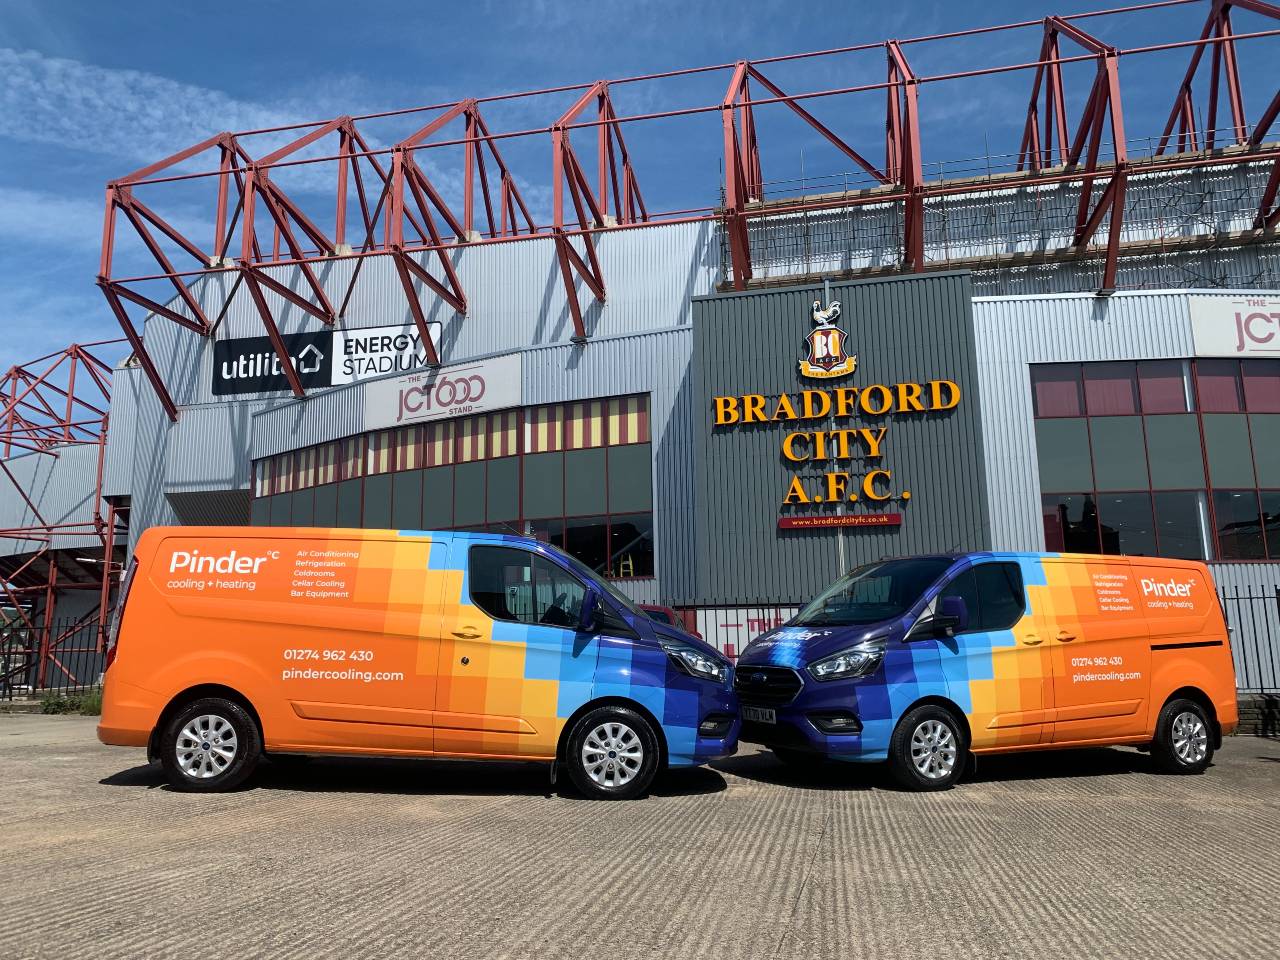 Pinder Cooling Providind Refrigeration Systems For Bradford City